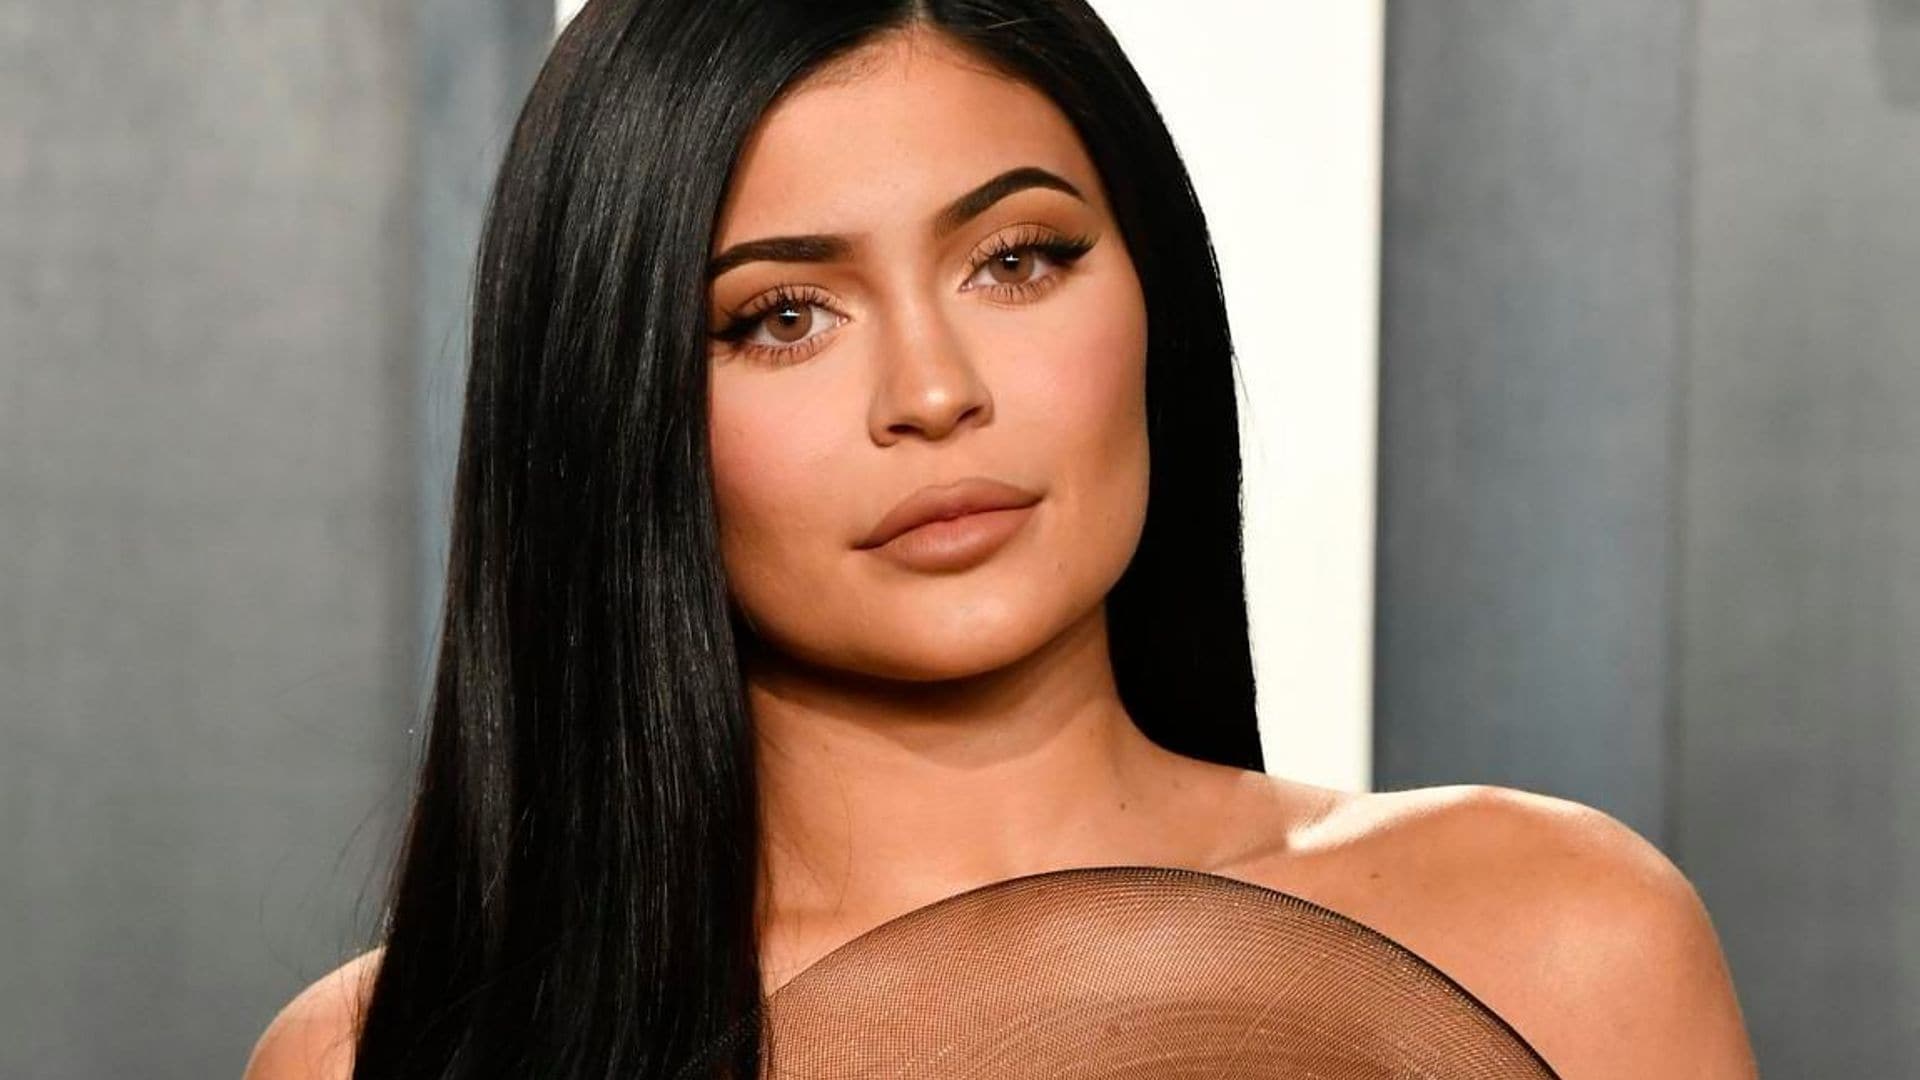 Kylie Jenner breaks another impressive record